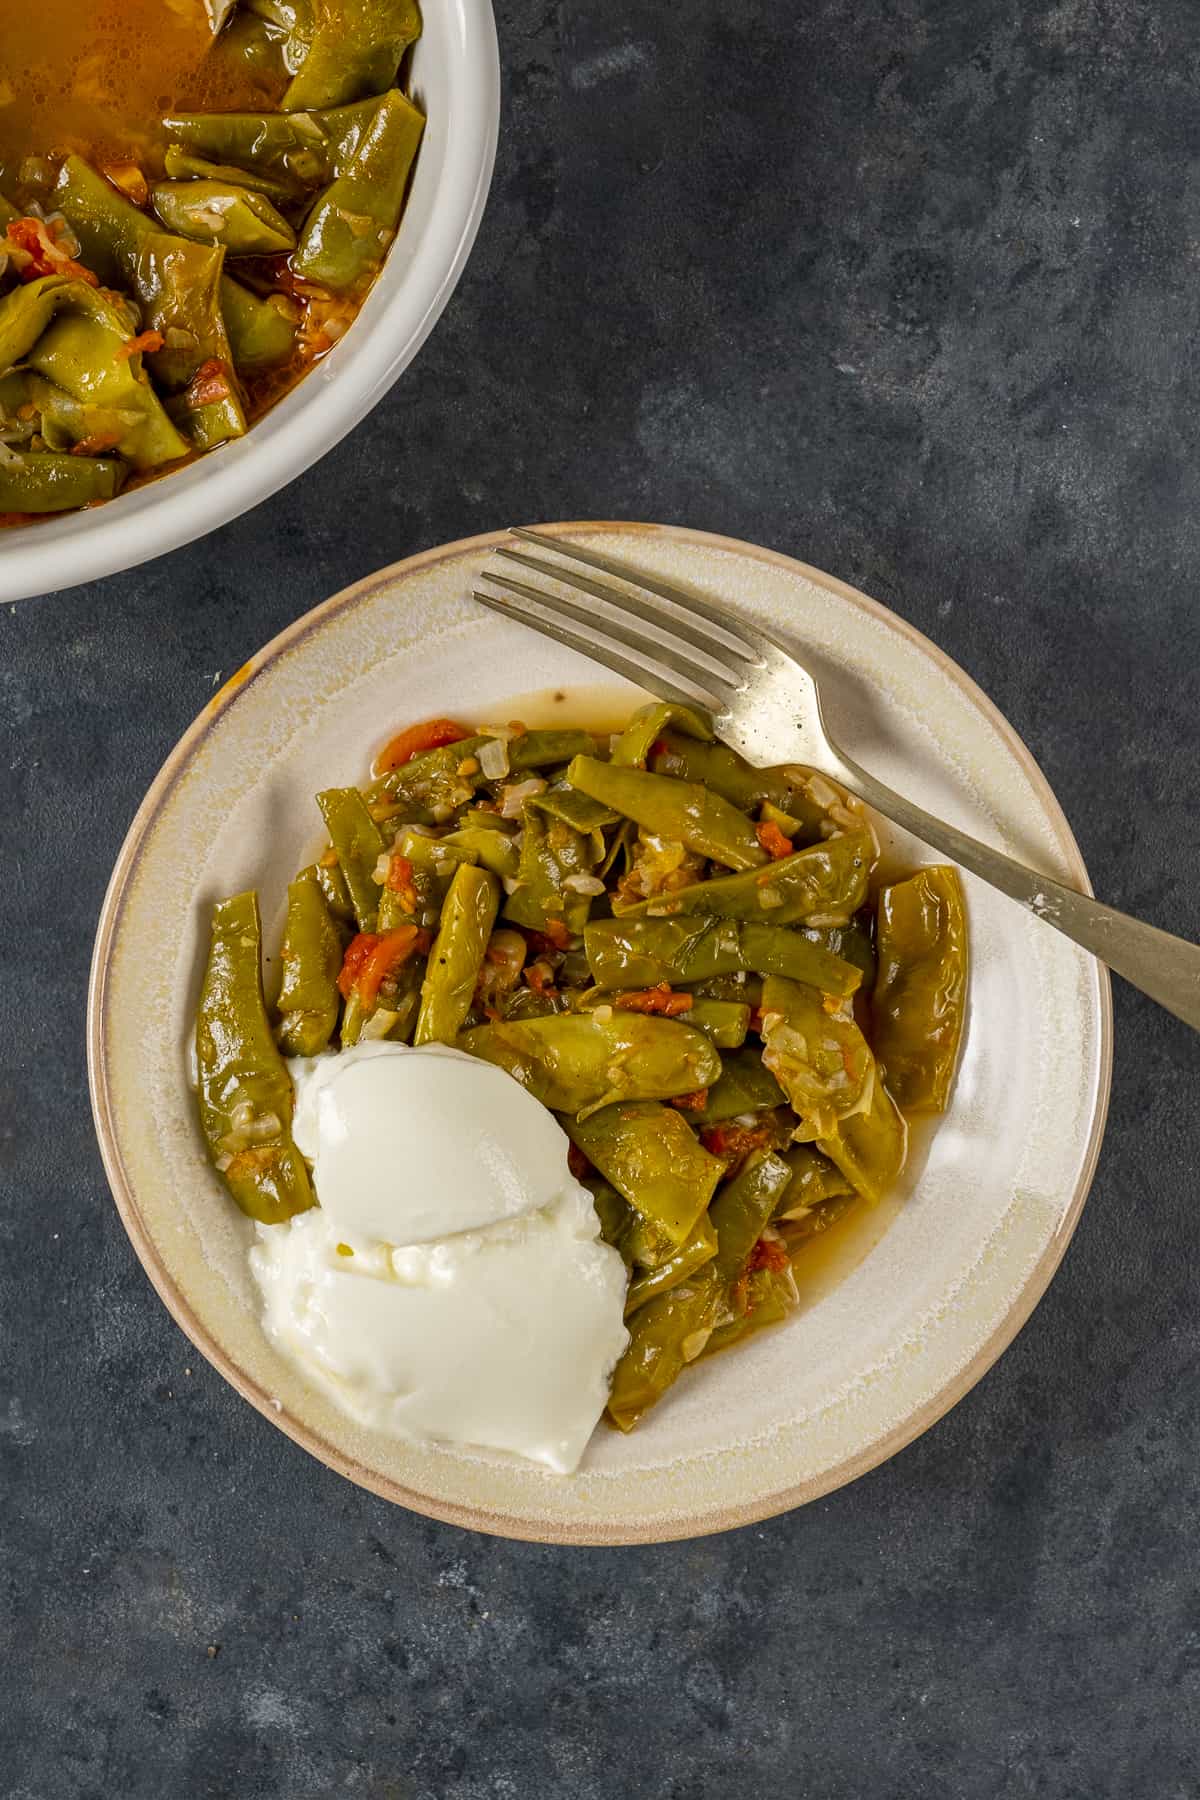 Turkish style green beans served in a white bowl with some yogurt on the side pictured on a dark background.